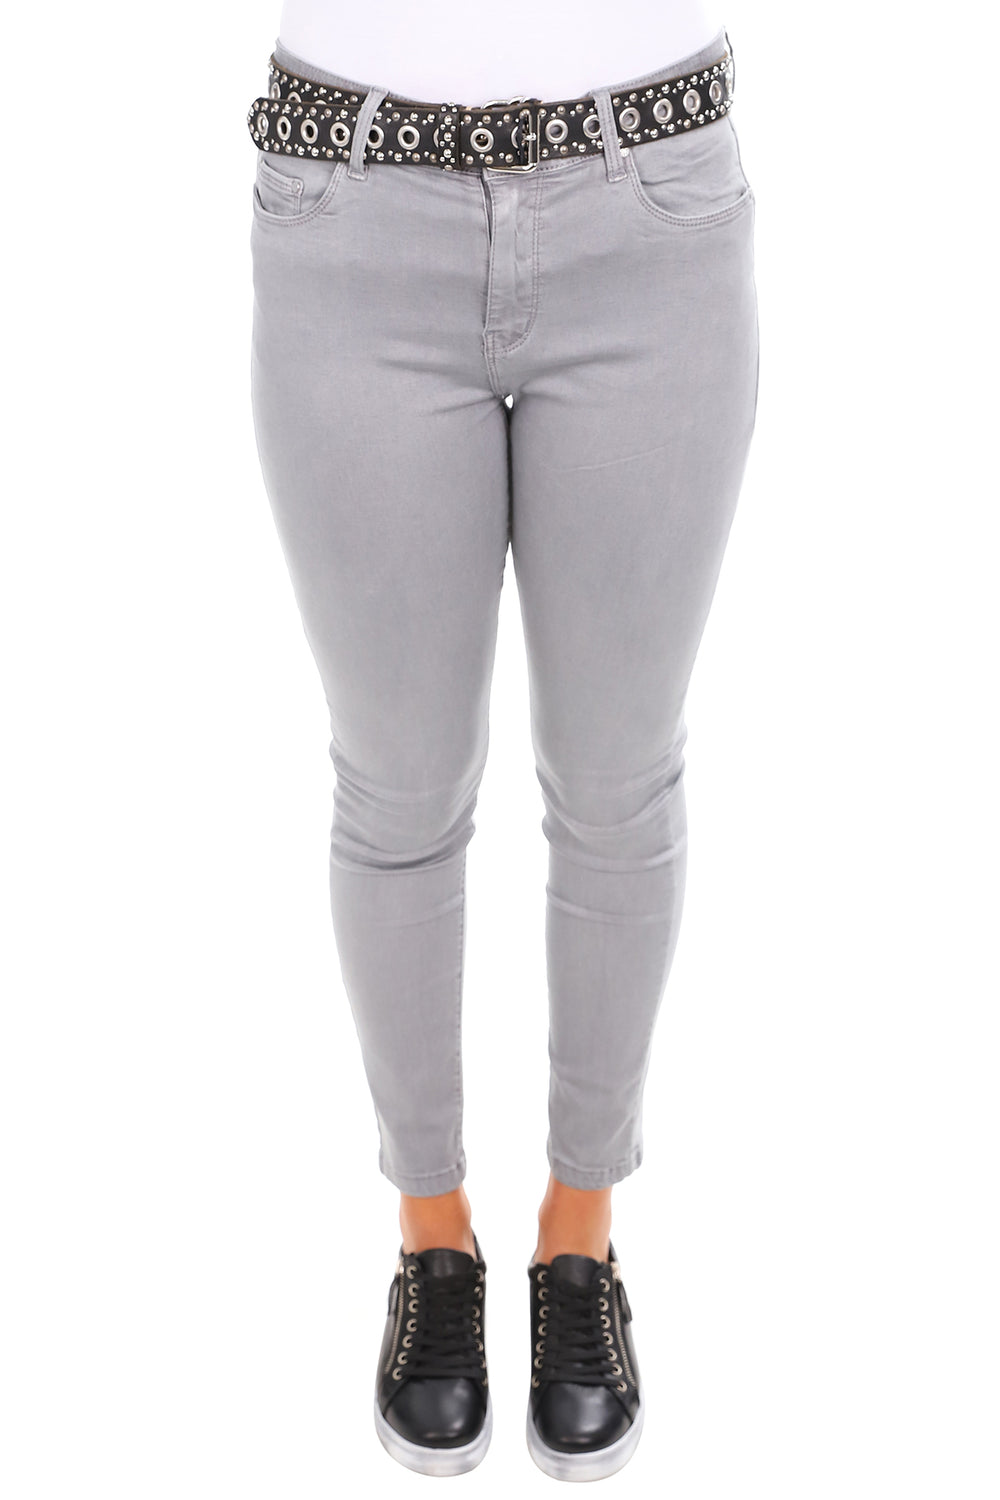 Ana and Lucy high rise jeans in grey, sold and shipped from Pizazz Boutique Nelson Bay women's dresses online Australia